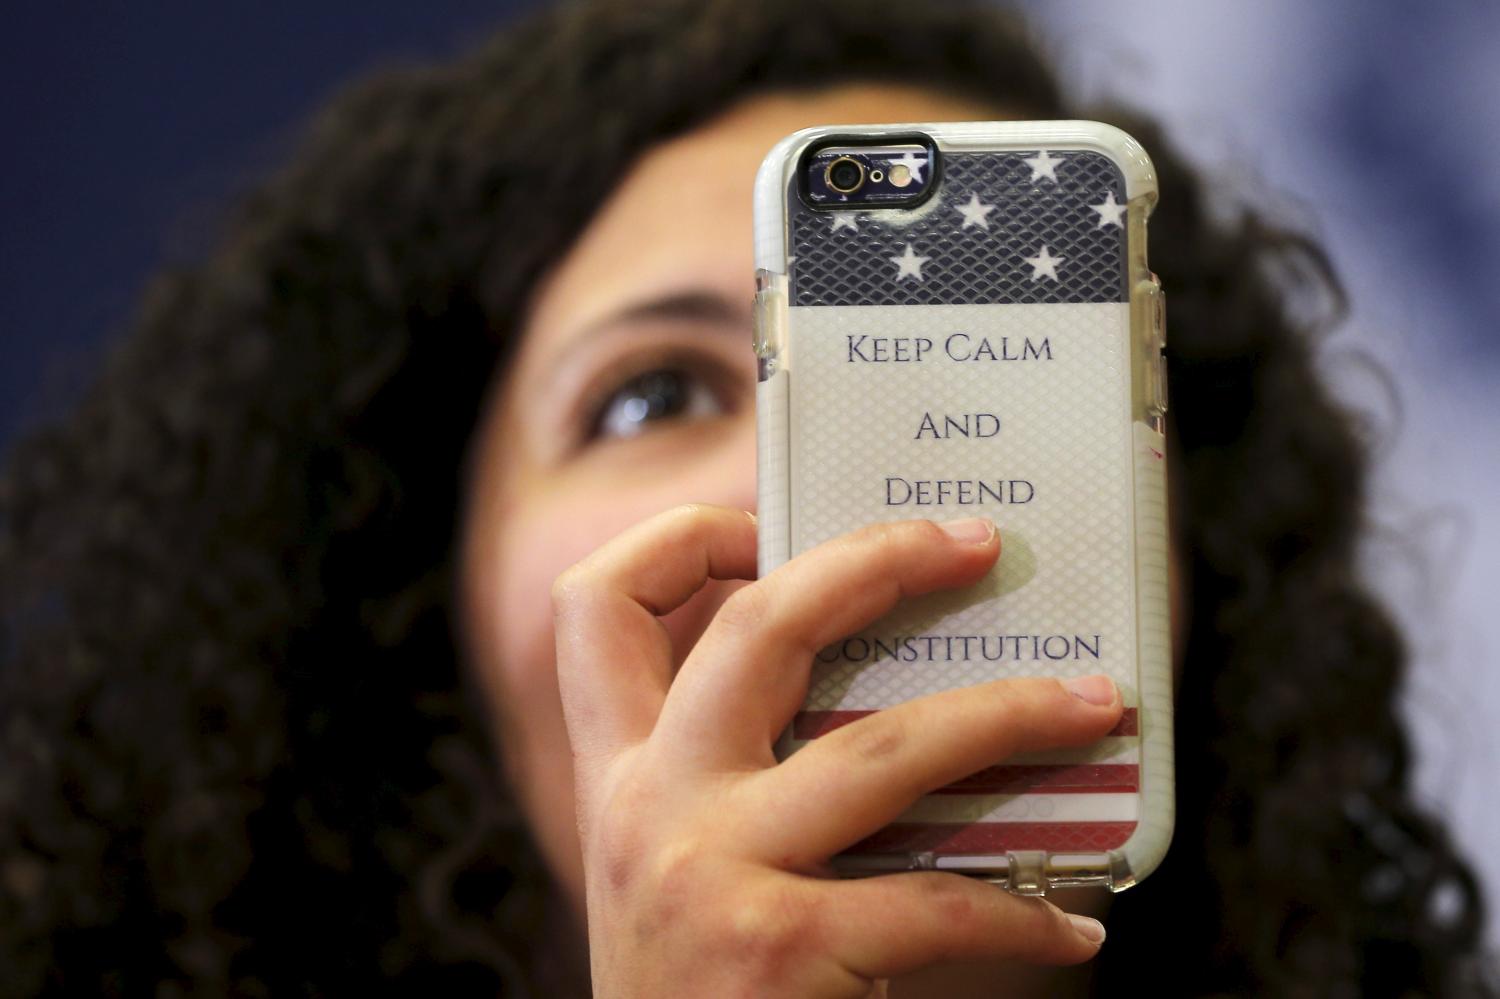 An audience member holds up a phone with a case reading "Keep Calm and Defend the Constitution" during a "Get Out to Caucus" rally with U.S. Democratic presidential candidate Hillary Clinton in Cedar Rapids, Iowa